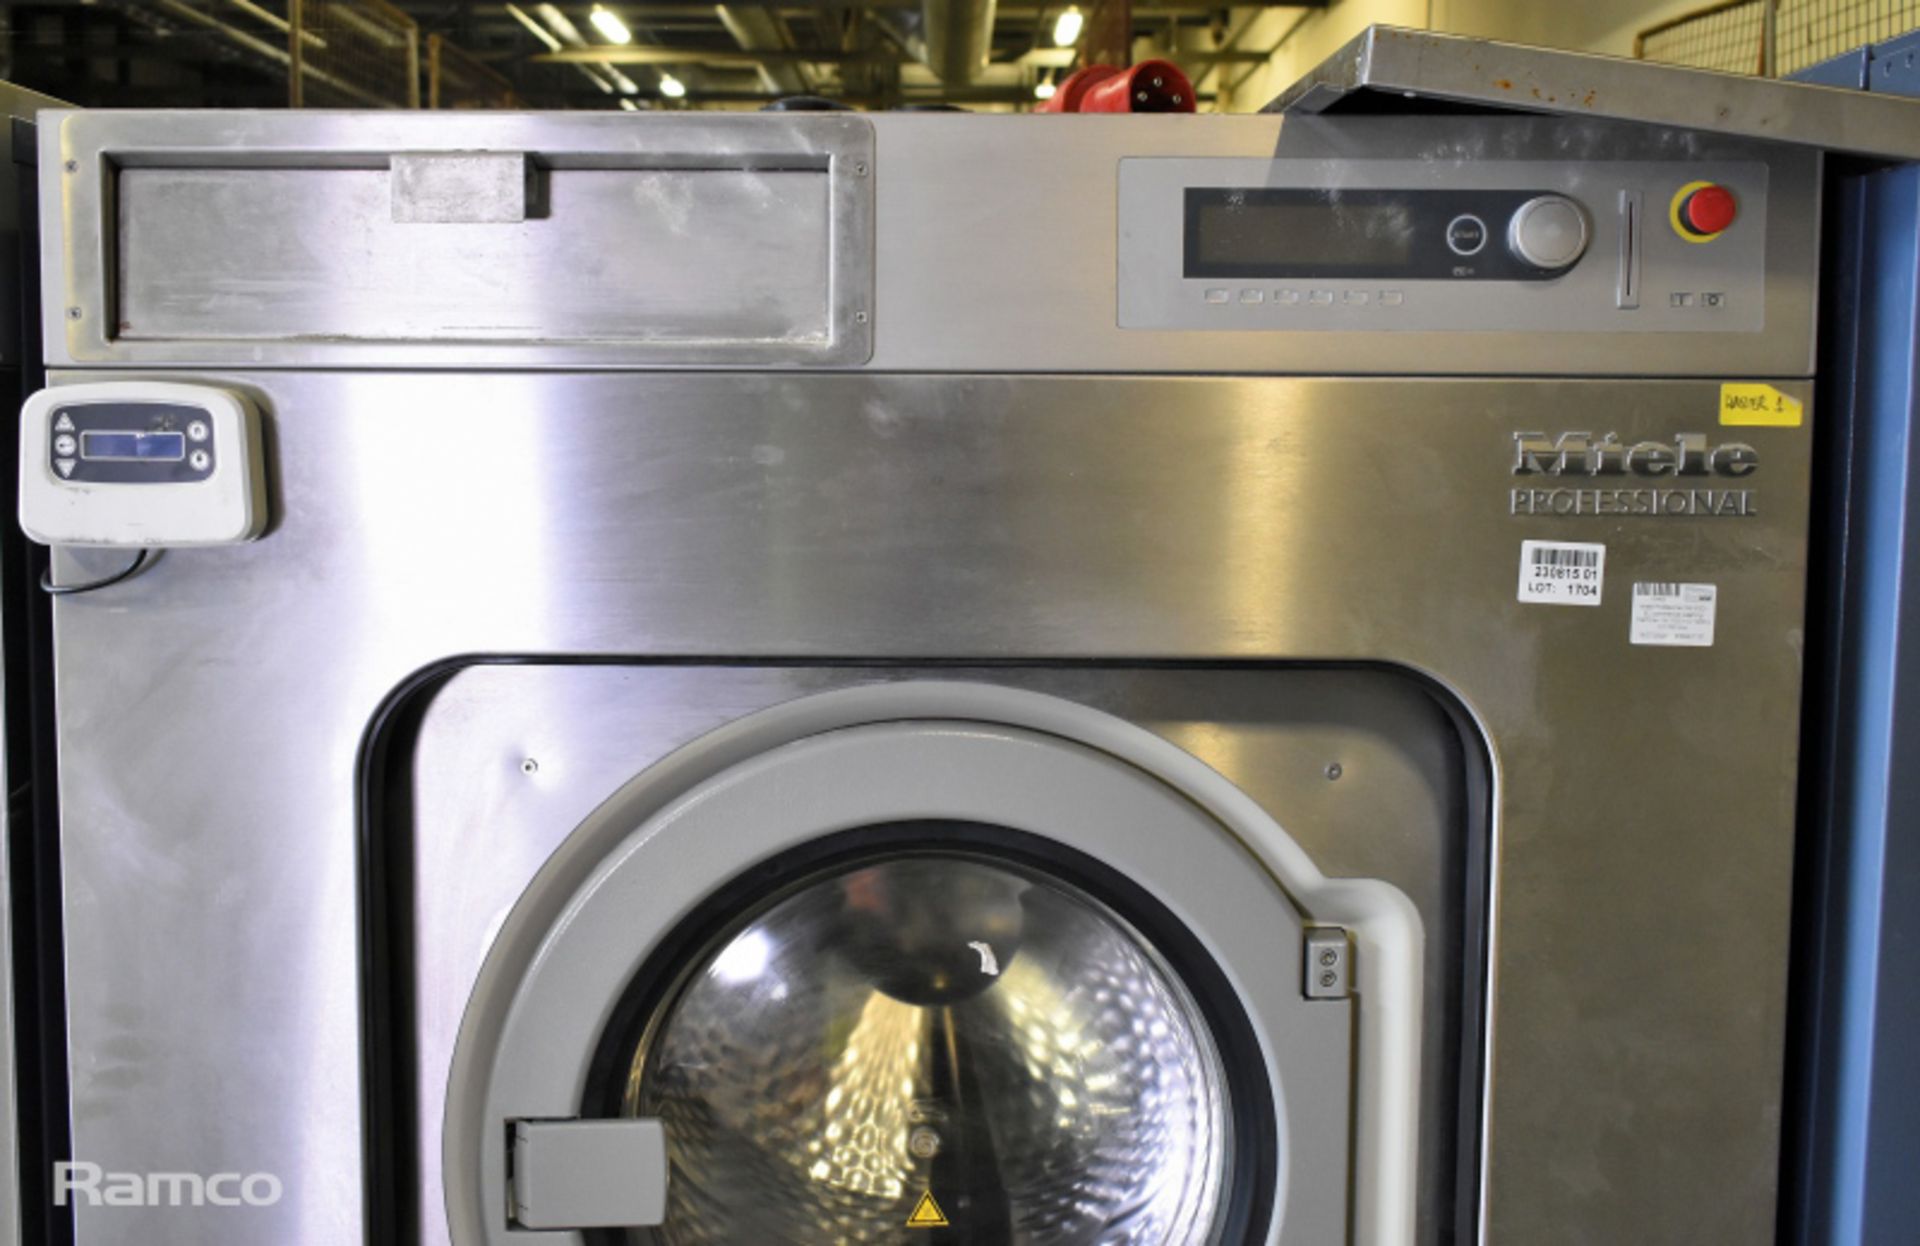 Miele Professional PW 6321 EL commercial washing machine - W 1100 x D 1200 x H 1700 mm - Image 2 of 13